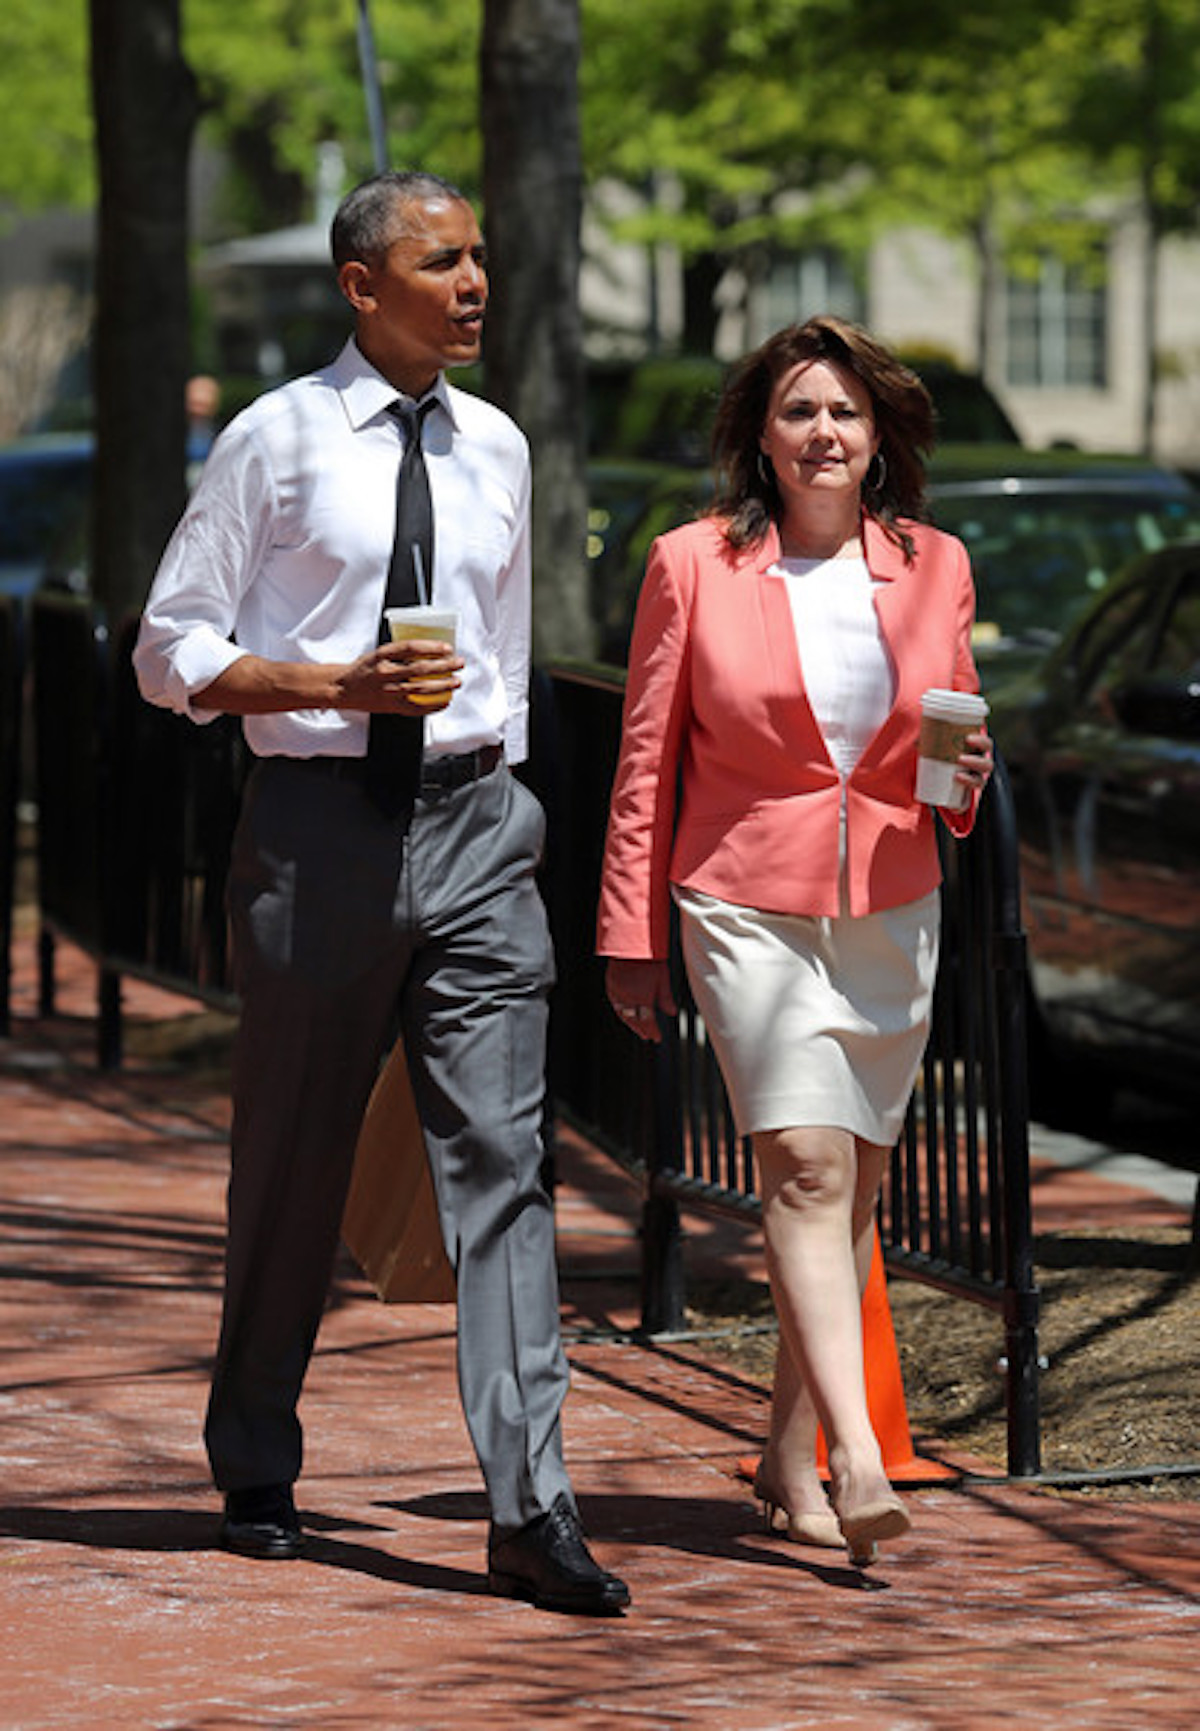 President Barack Obama, on a rare walkabout in D.C., with the National Teacher of the Year Shanna Peeples, Washington, DC, 2015. Photo courtesy of Shanna Peeples.